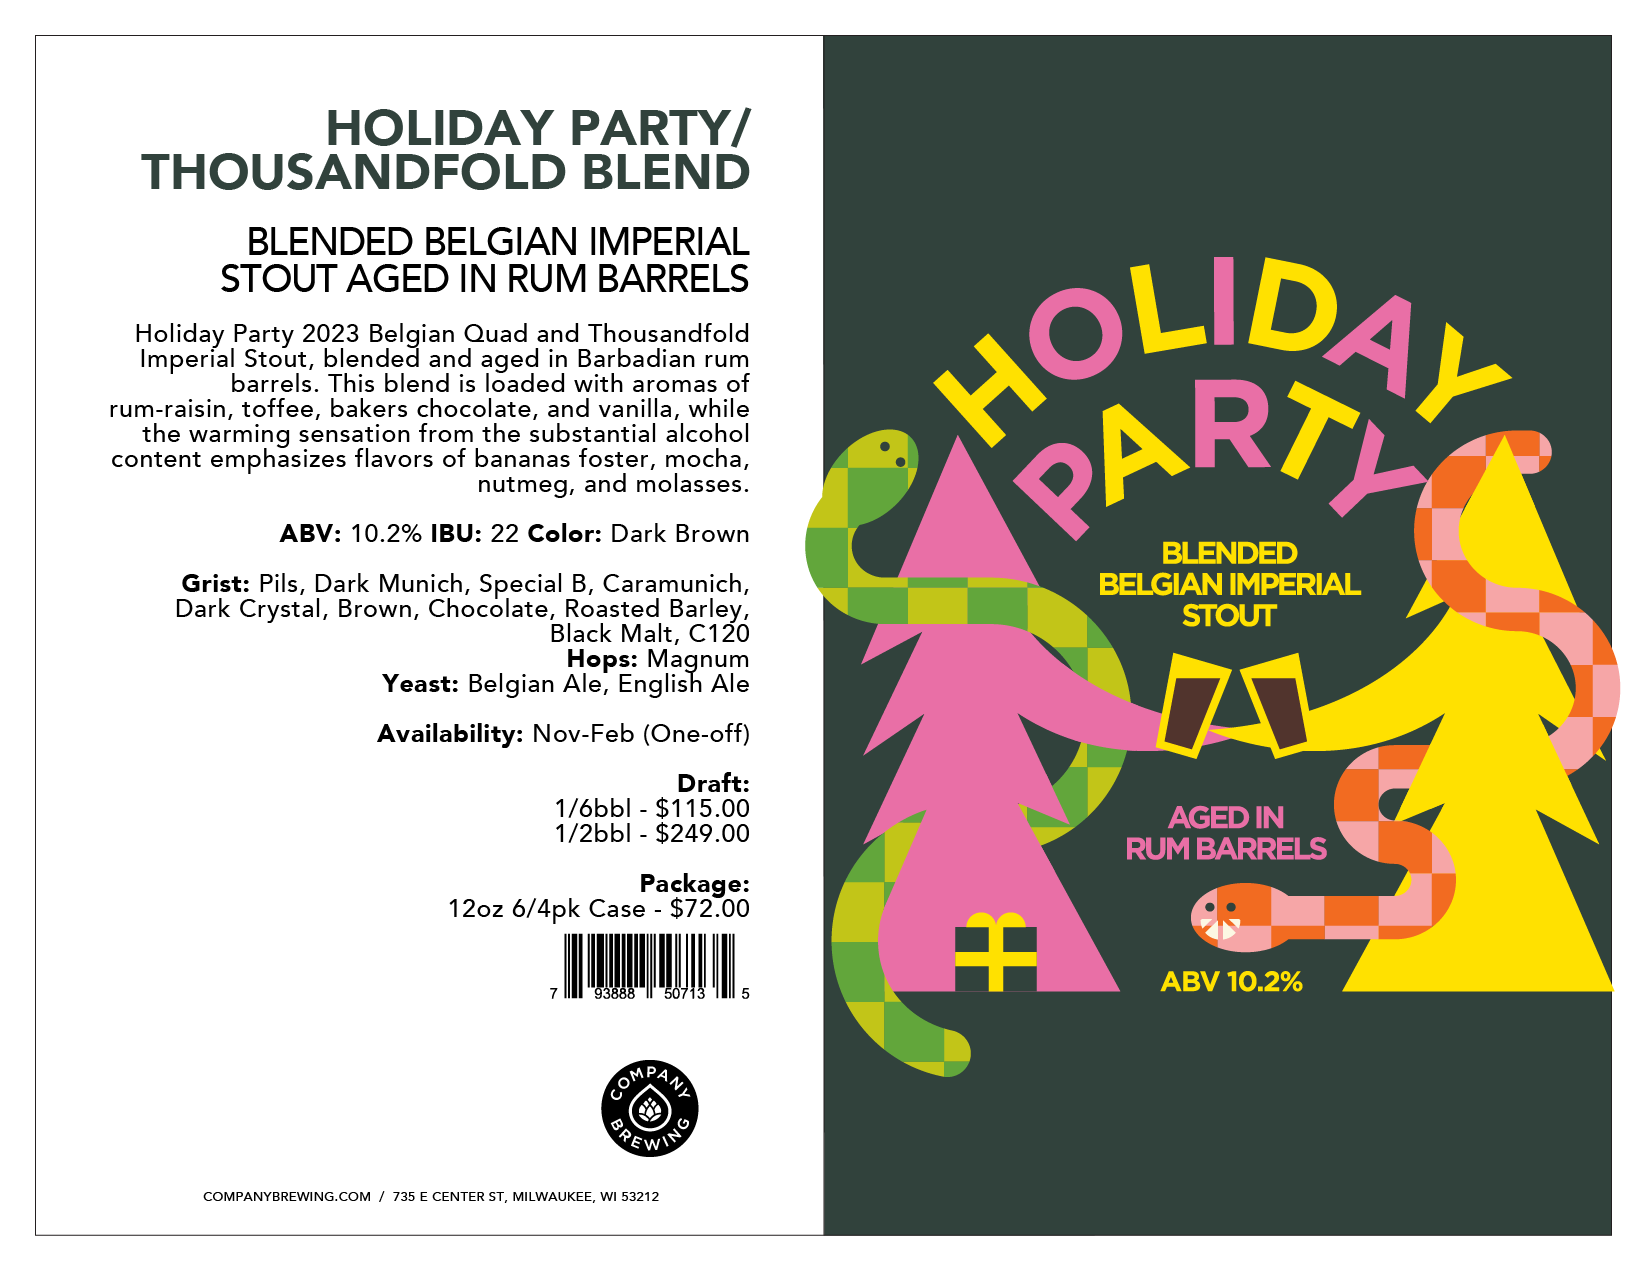 HolidayParty_Thousand_Sell-Sheet.png